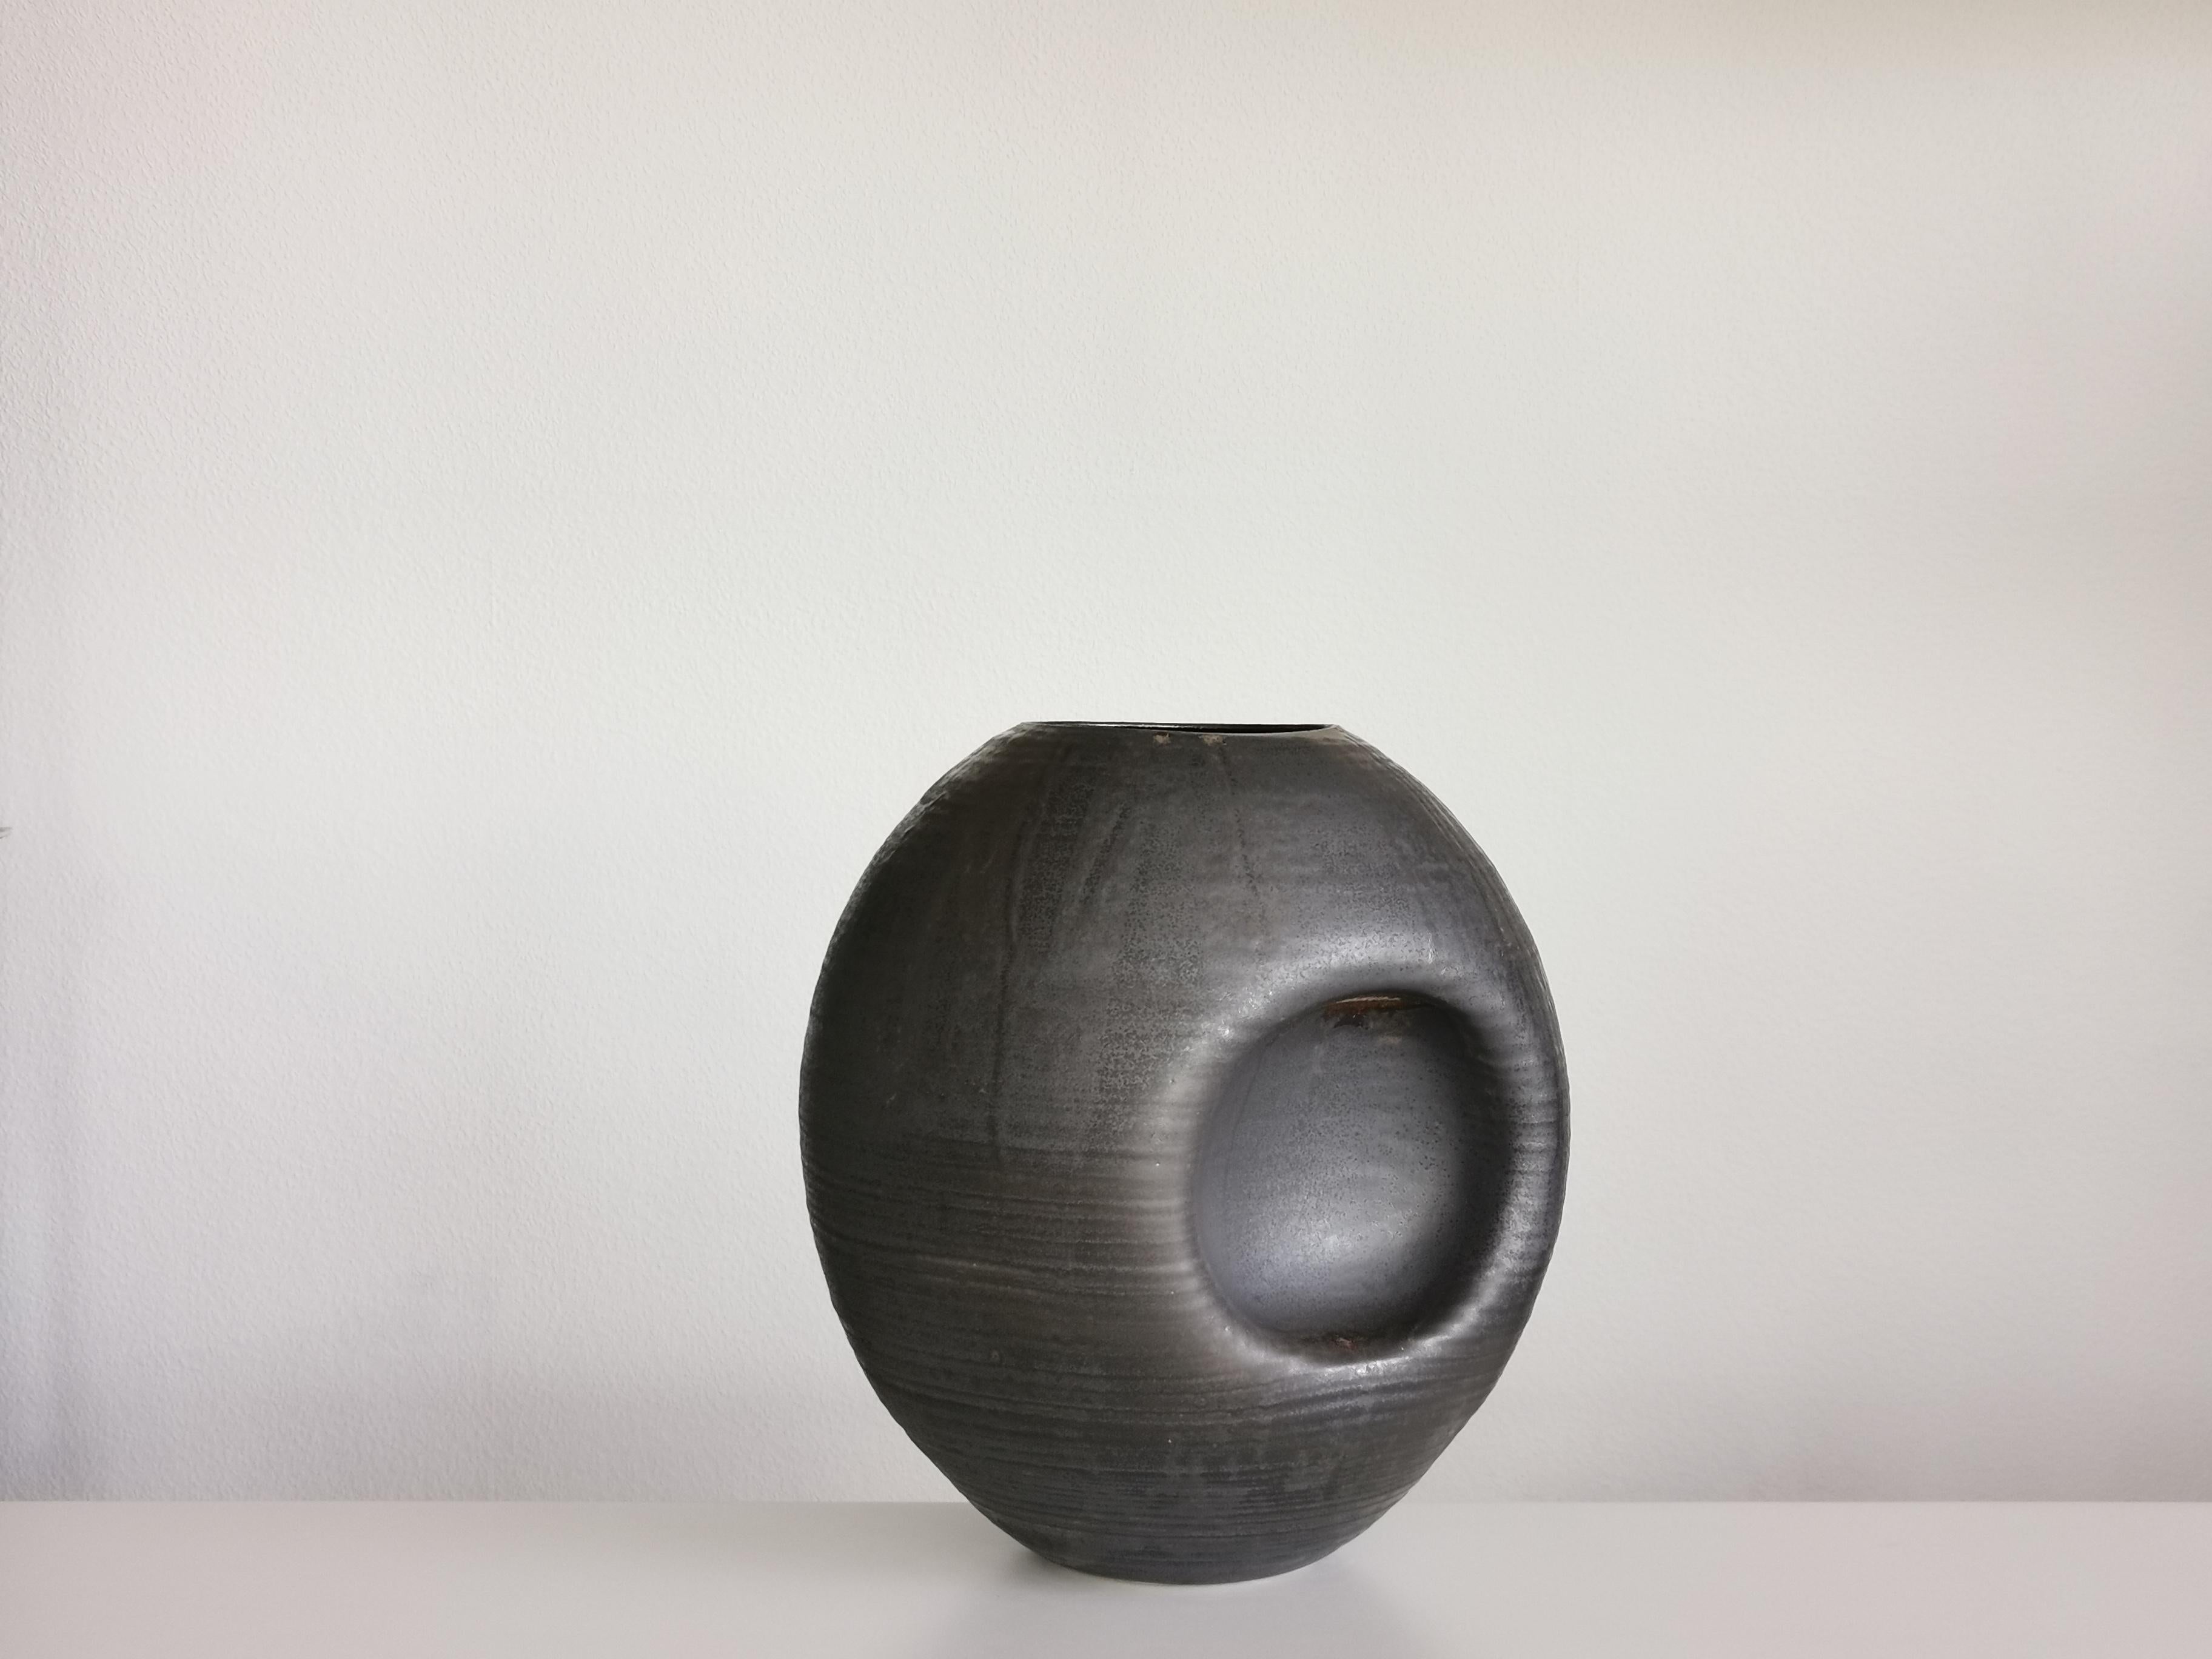 New sumptuous ceramic vessel from ceramic artist Nicholas Arroyave-Portela.

Materials. White St. Thomas clay. Stoneware glazes. Multi fired to cone 9 (1260-1280 degrees)

The artist starts out by throwing his creations on the wheel using a